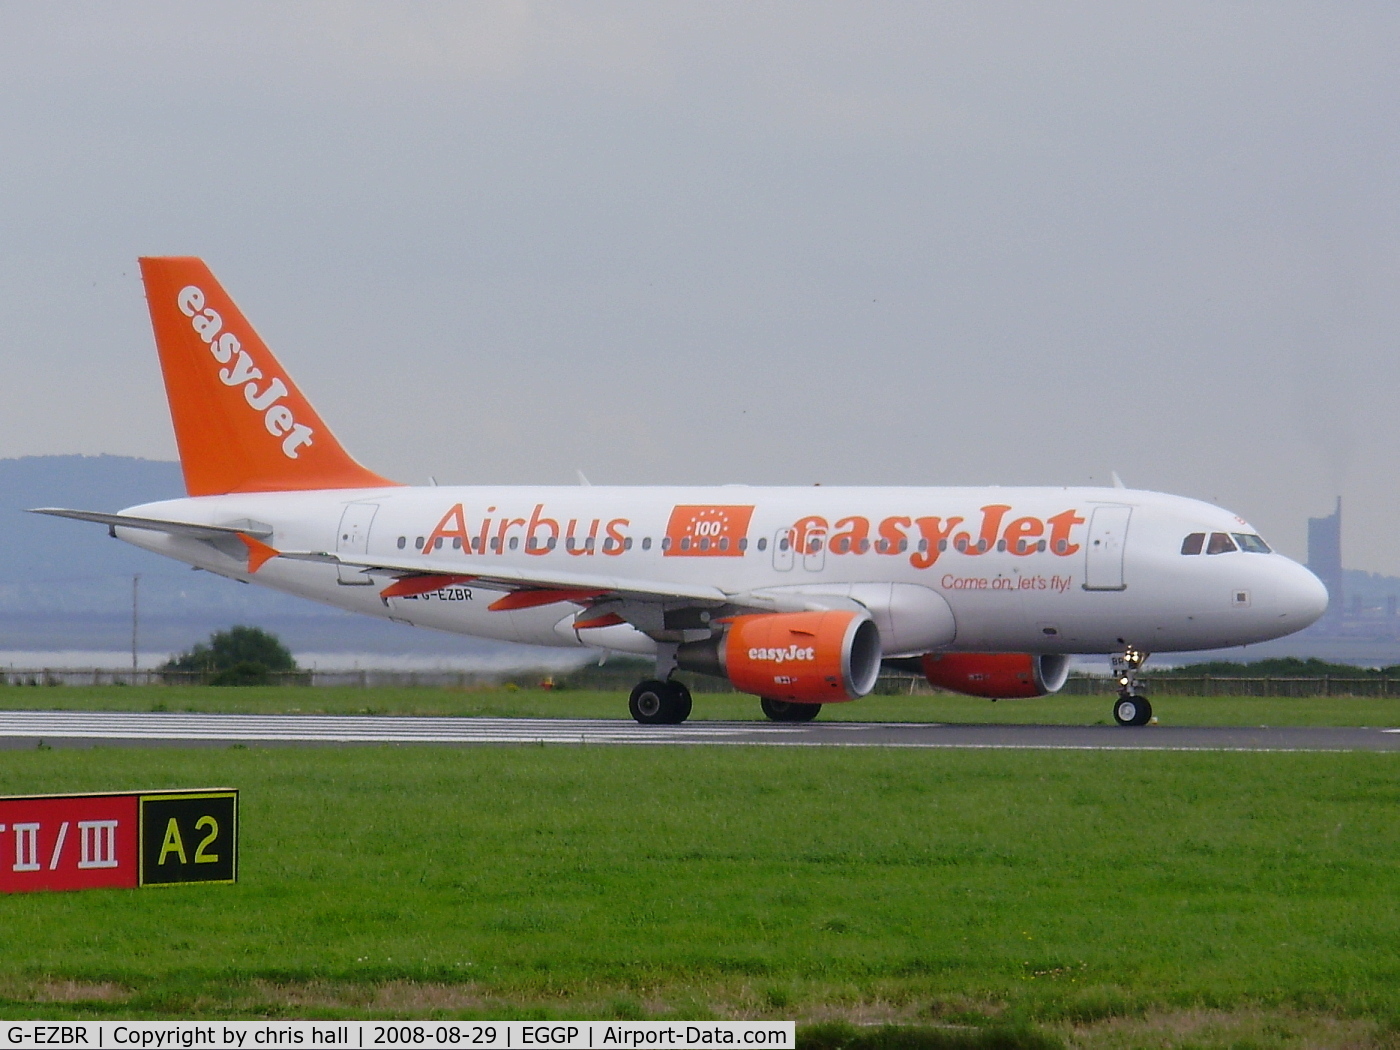 G-EZBR, 2007 Airbus A319-111 C/N 3088, Easijet's 100th Airbus